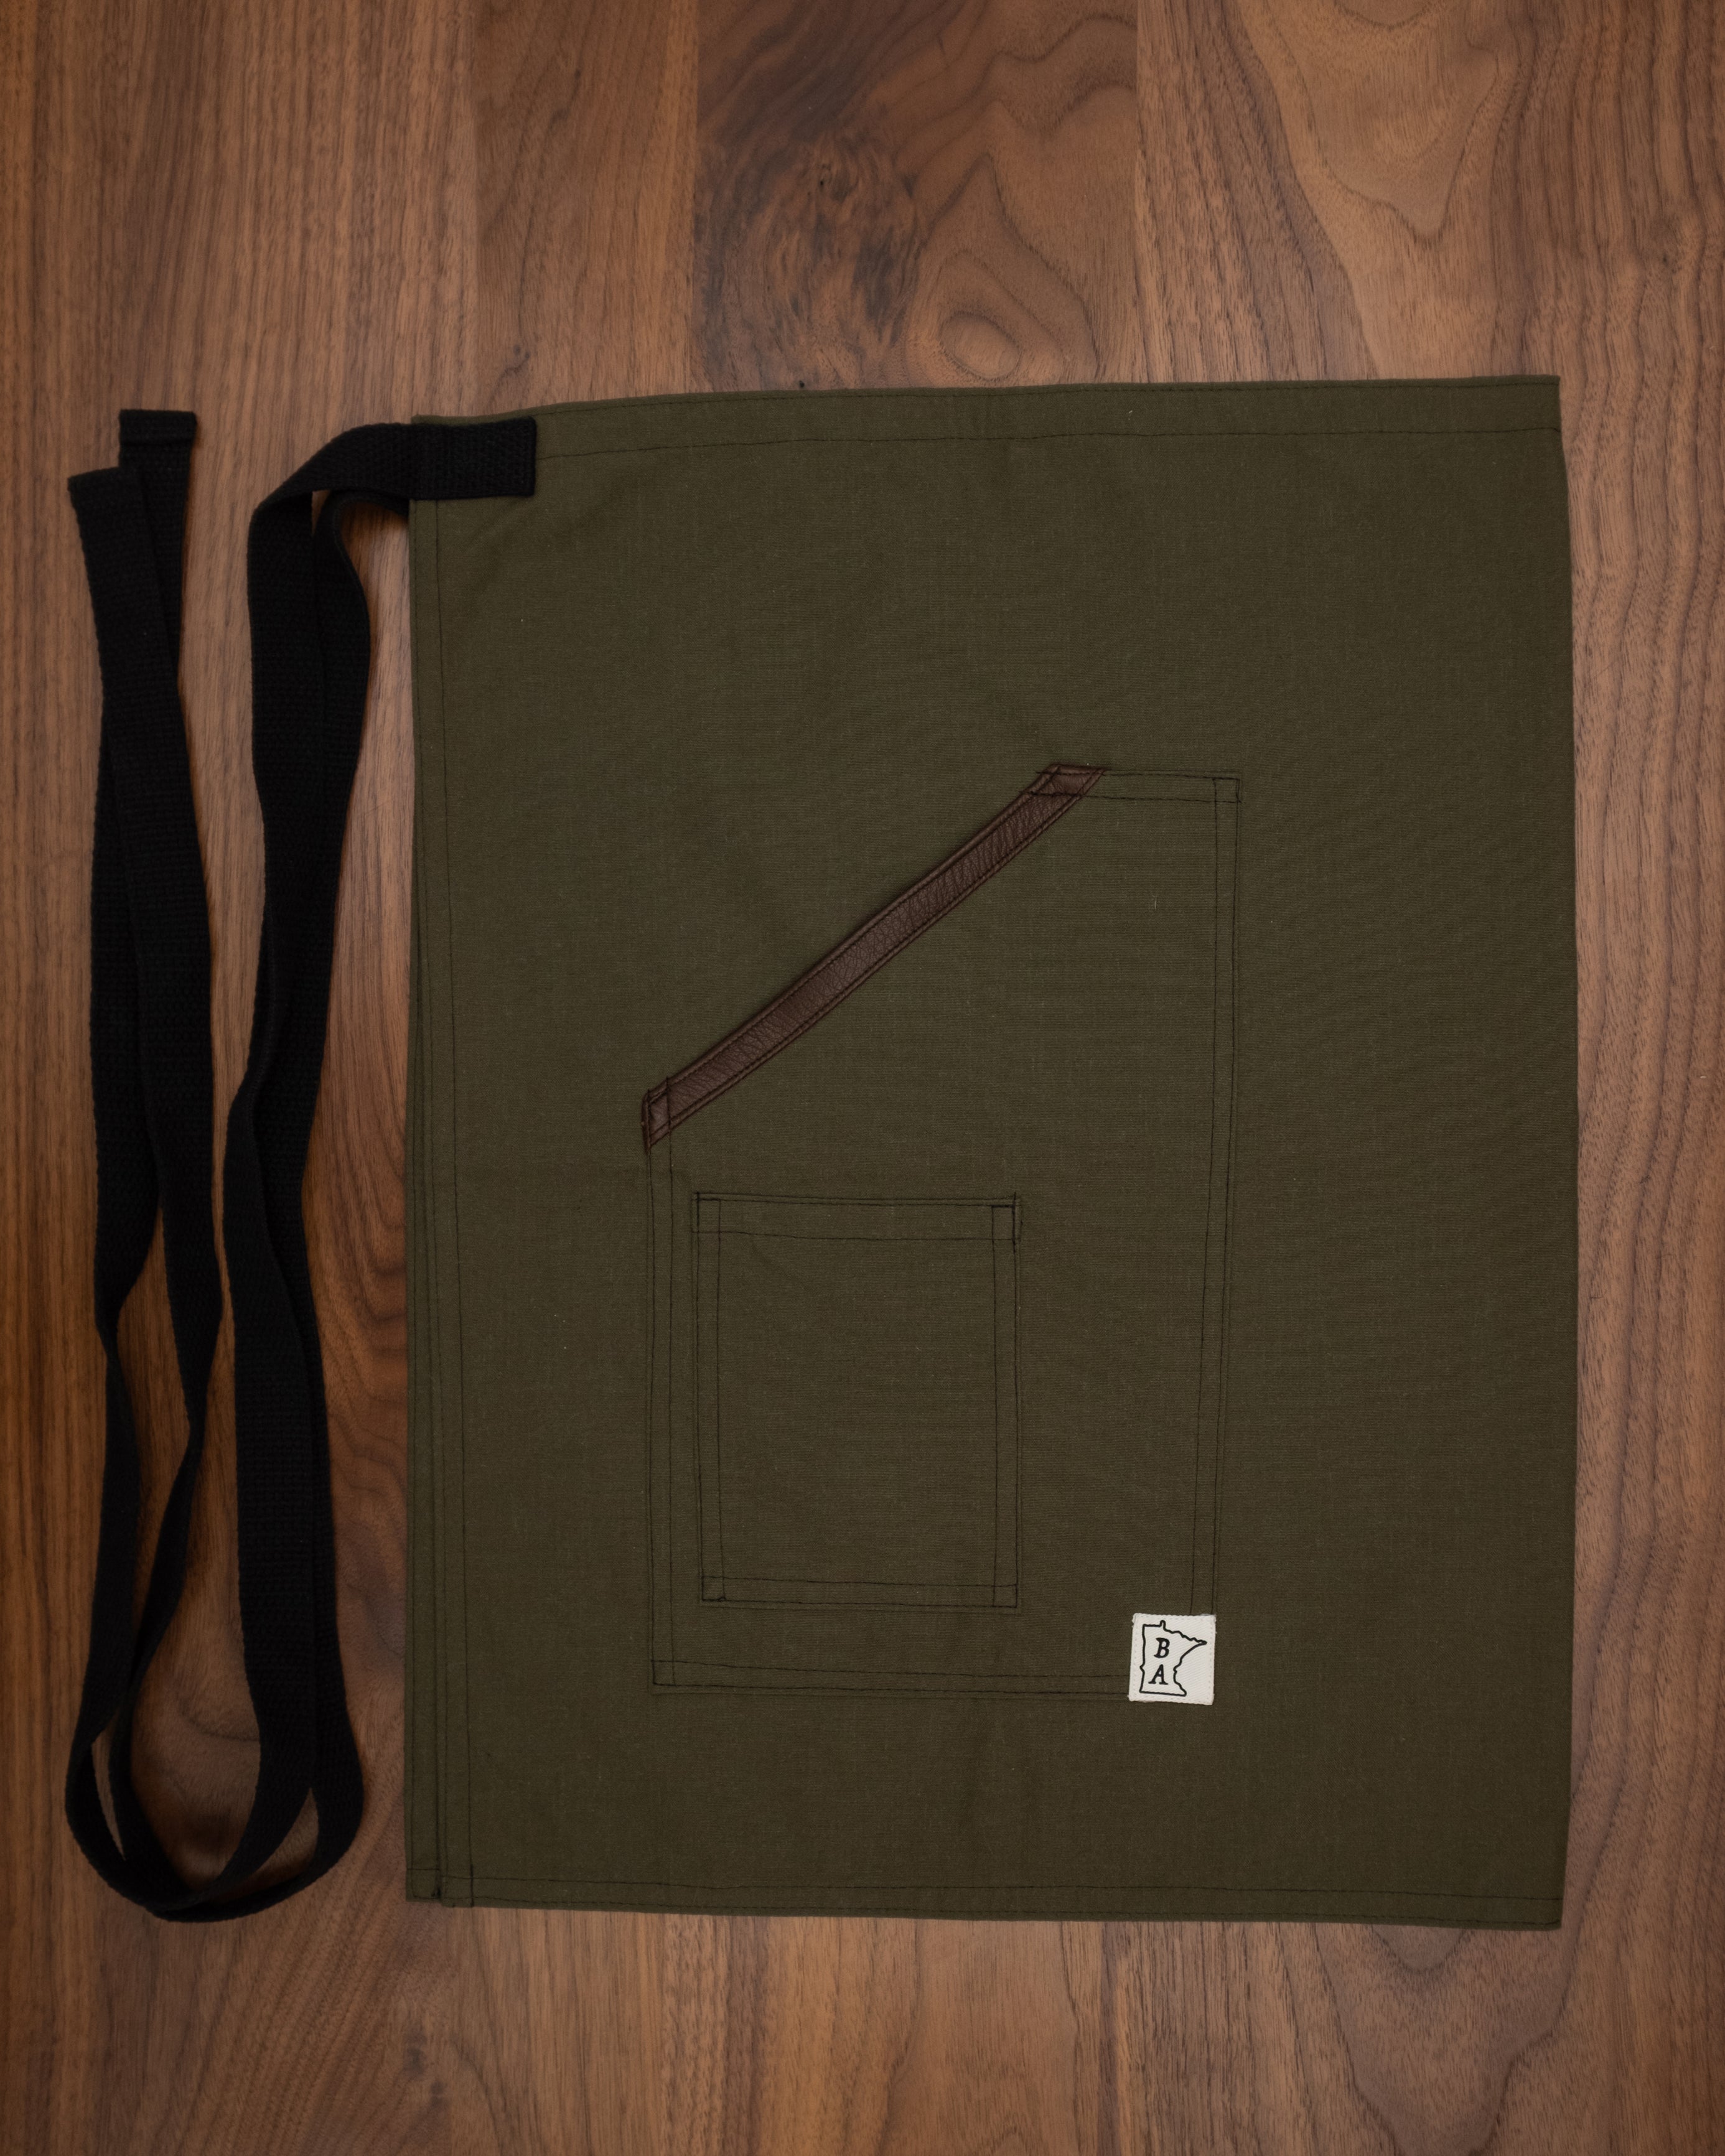 Nomex-Kevlar olive colored bistro apron with black strapping and deerhide trim folded on a wooden surface. The apron design Fire Watch was manufactured in Minnesota by Craftmade Aprons. The apron body protects against flames and punctures.